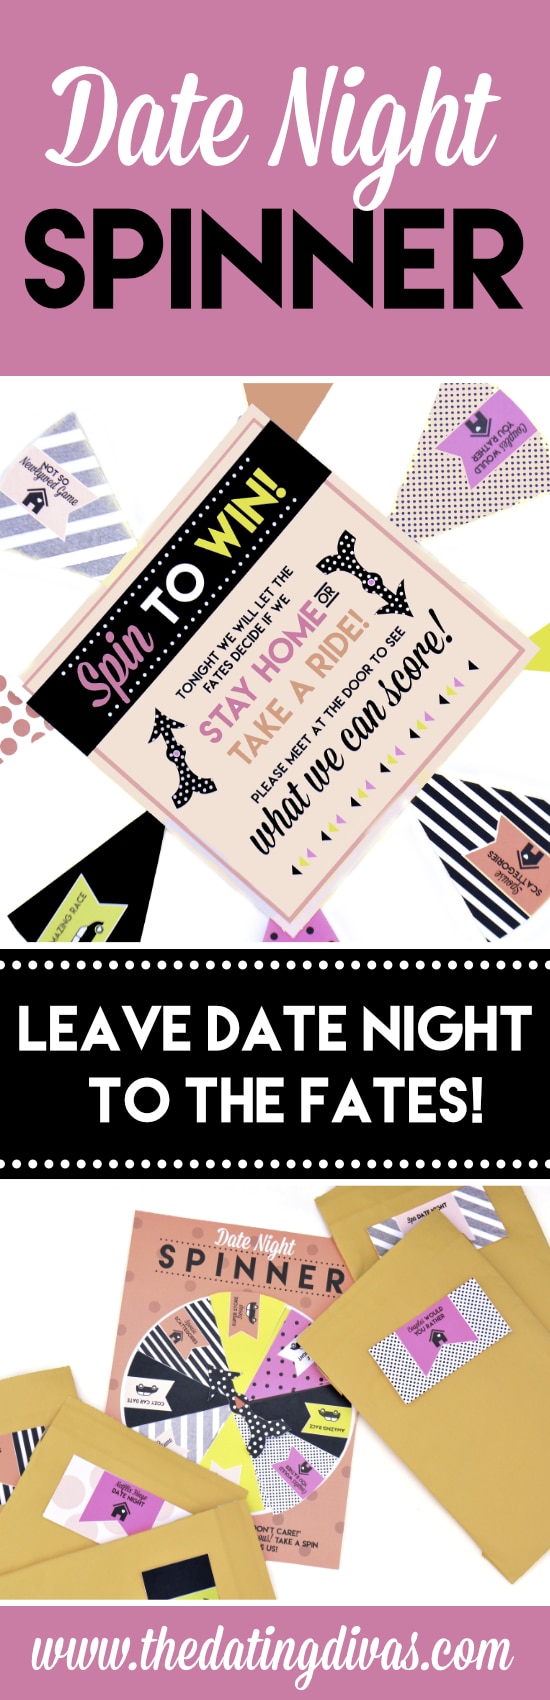 Date night spinner to leave your activity to the fates!